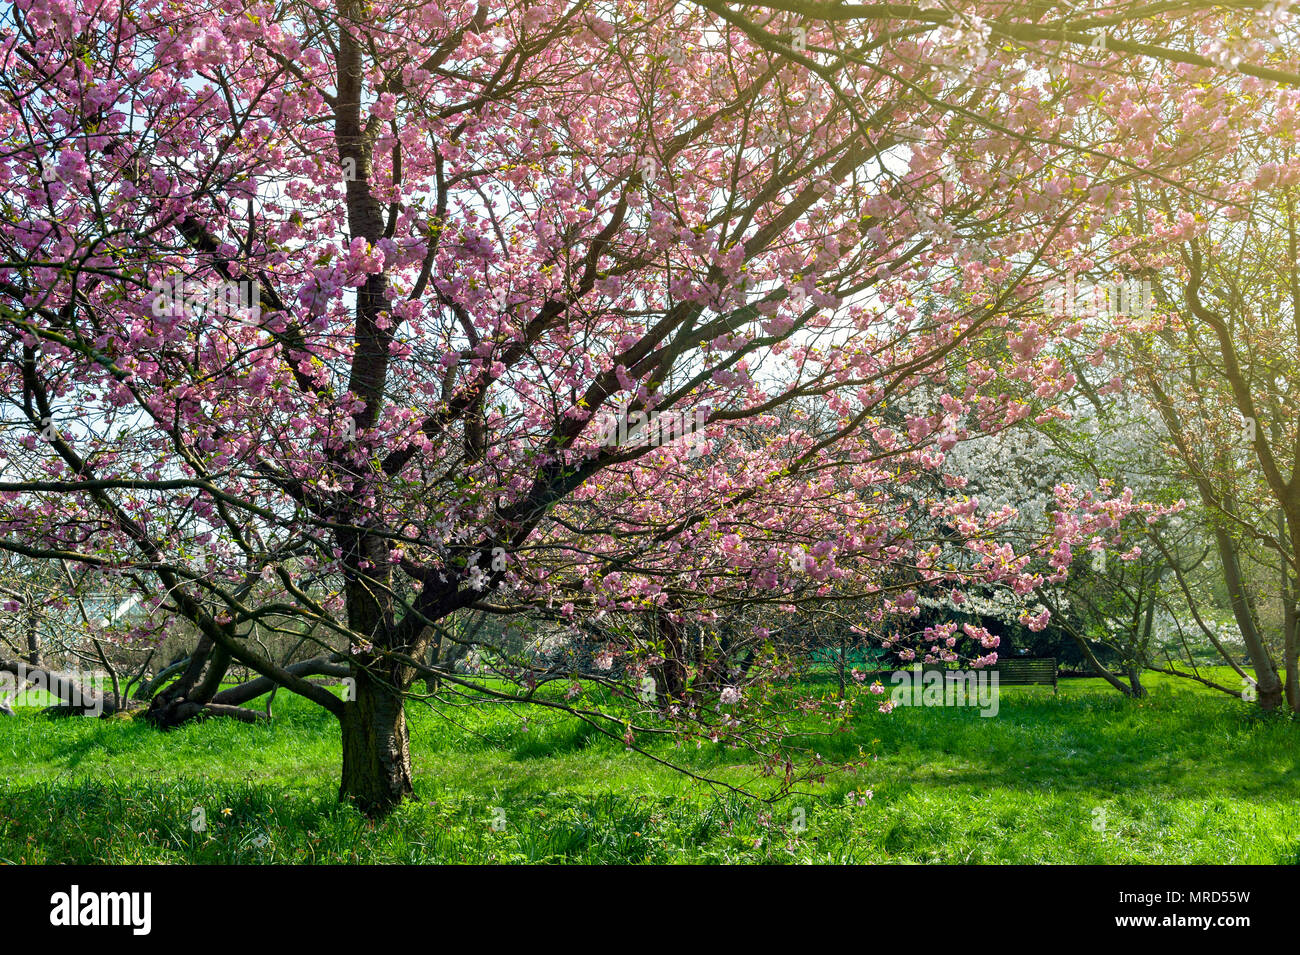 Blooming cherry blossom trees in the garden Stock Photo